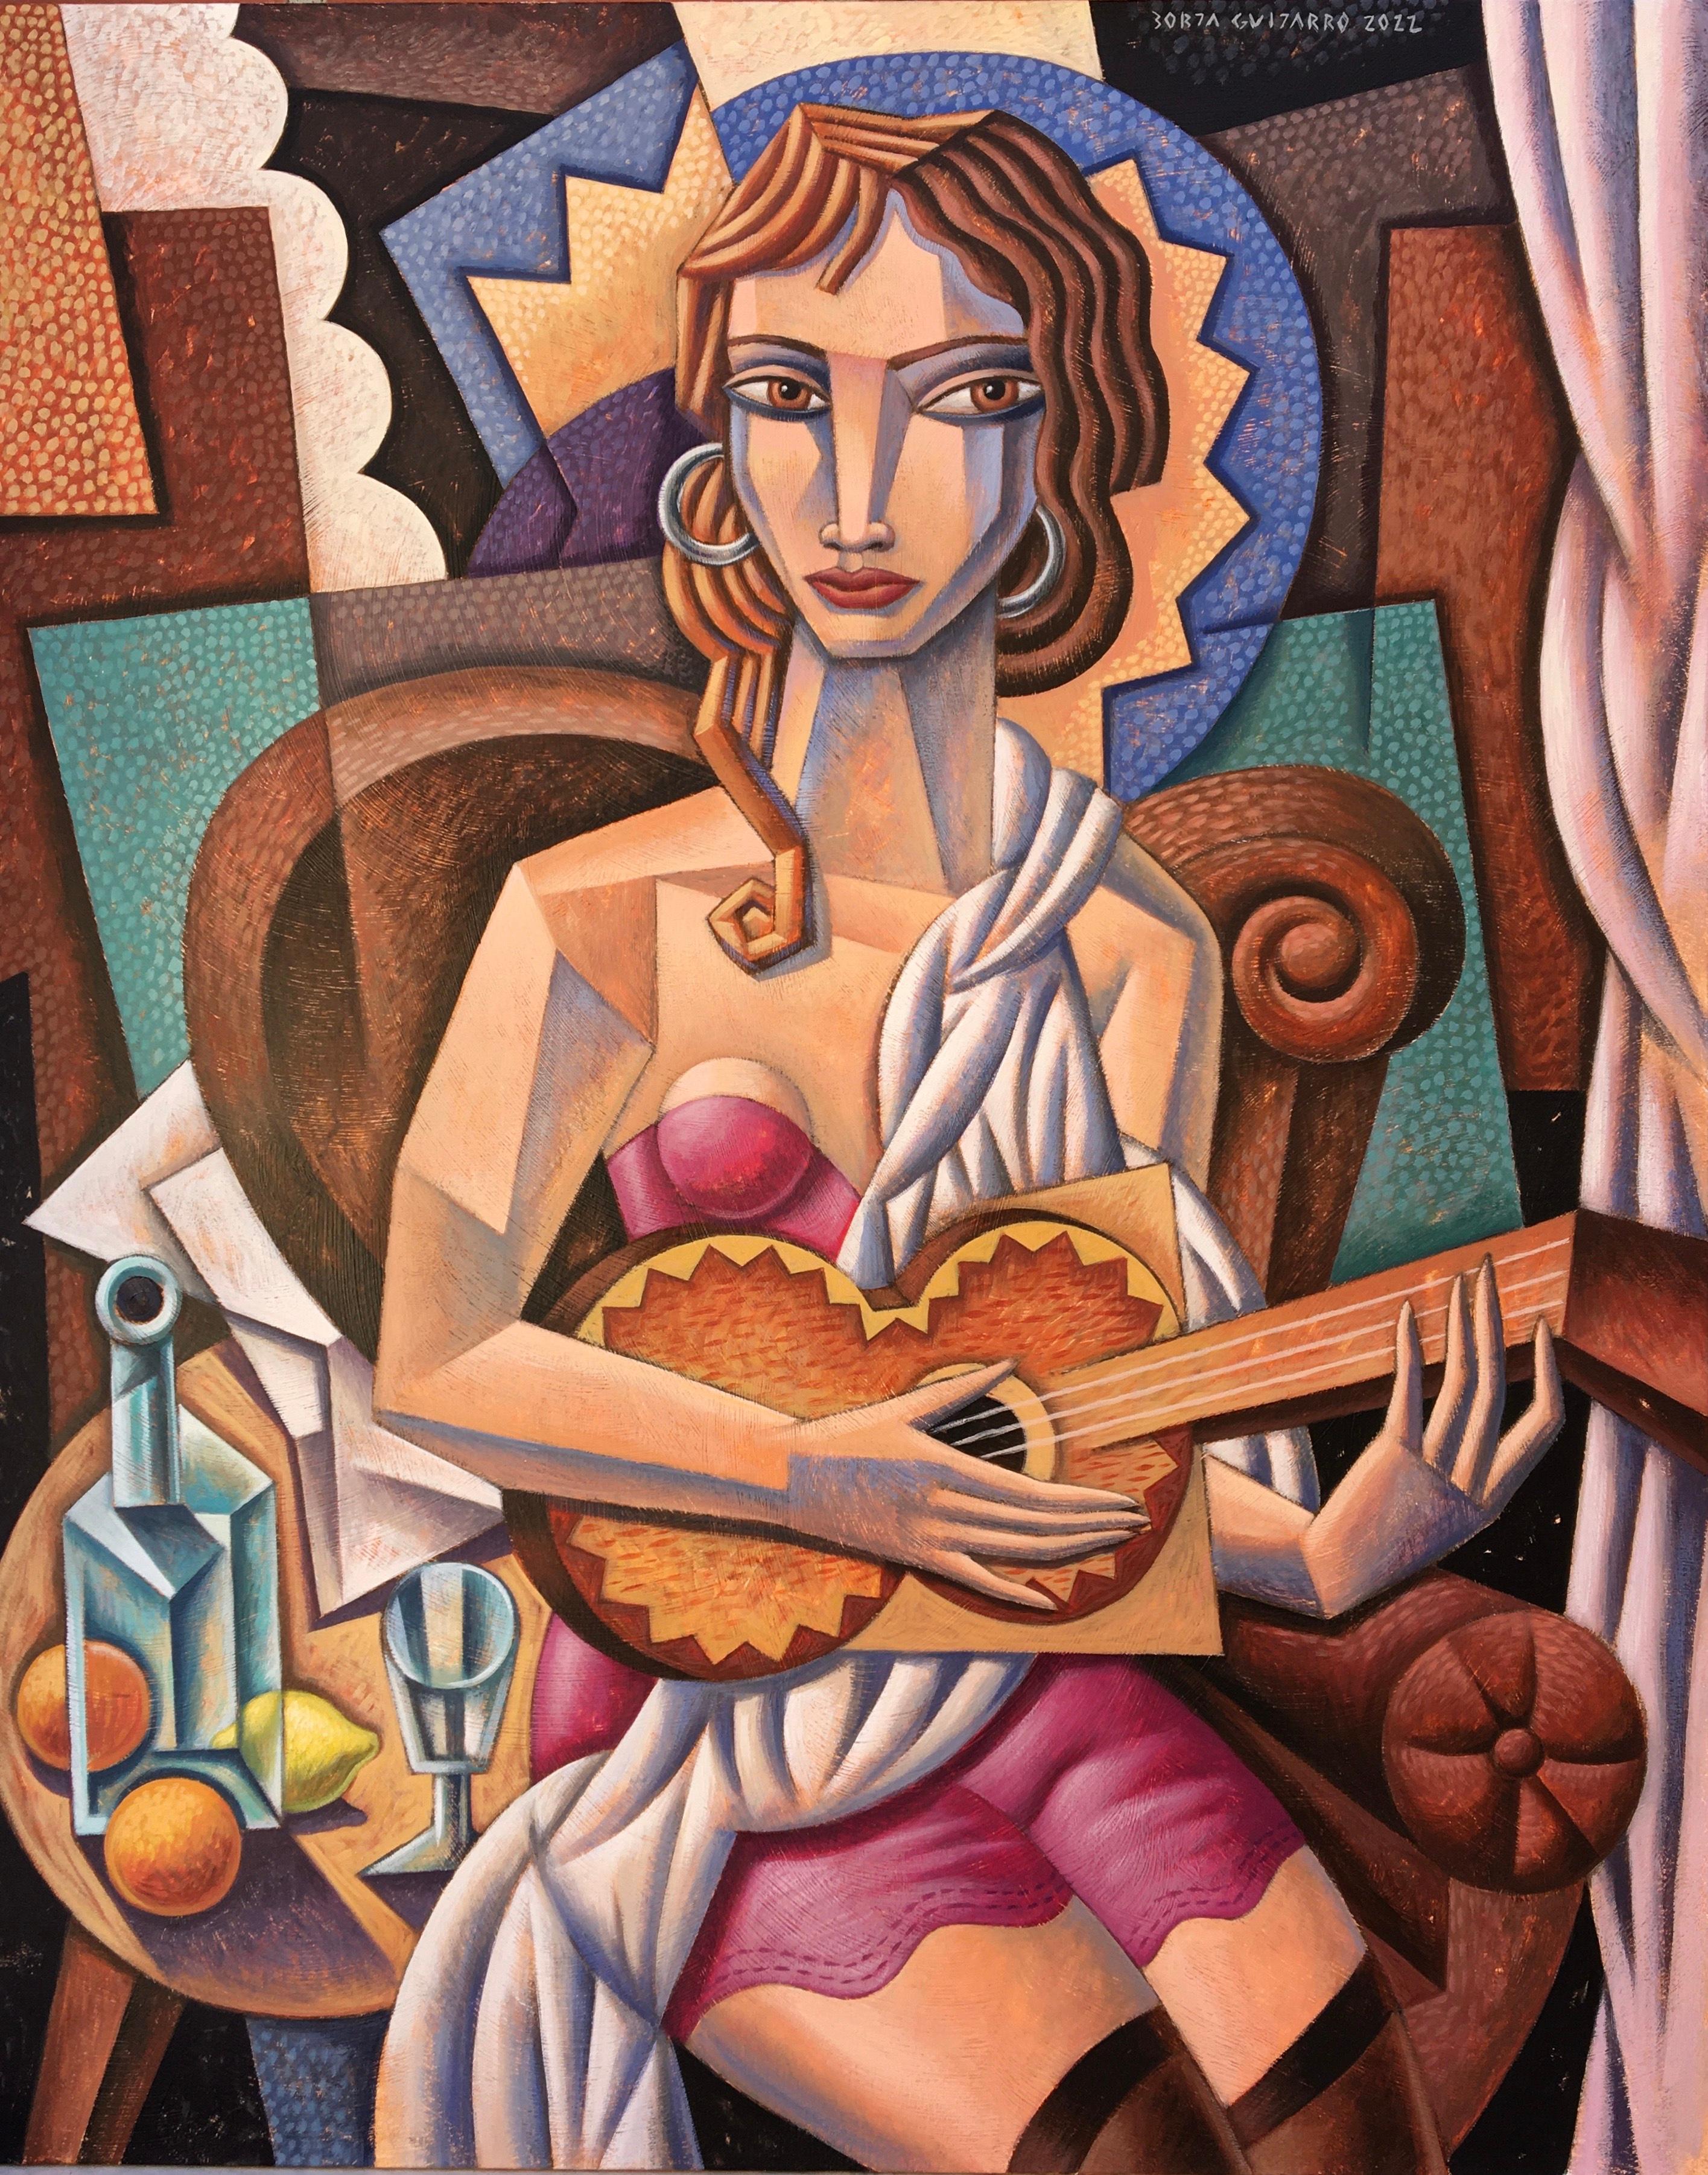 Tocando  Guitarra - female figure modern abstract cubism painting human form - Painting by Borja Guijarro